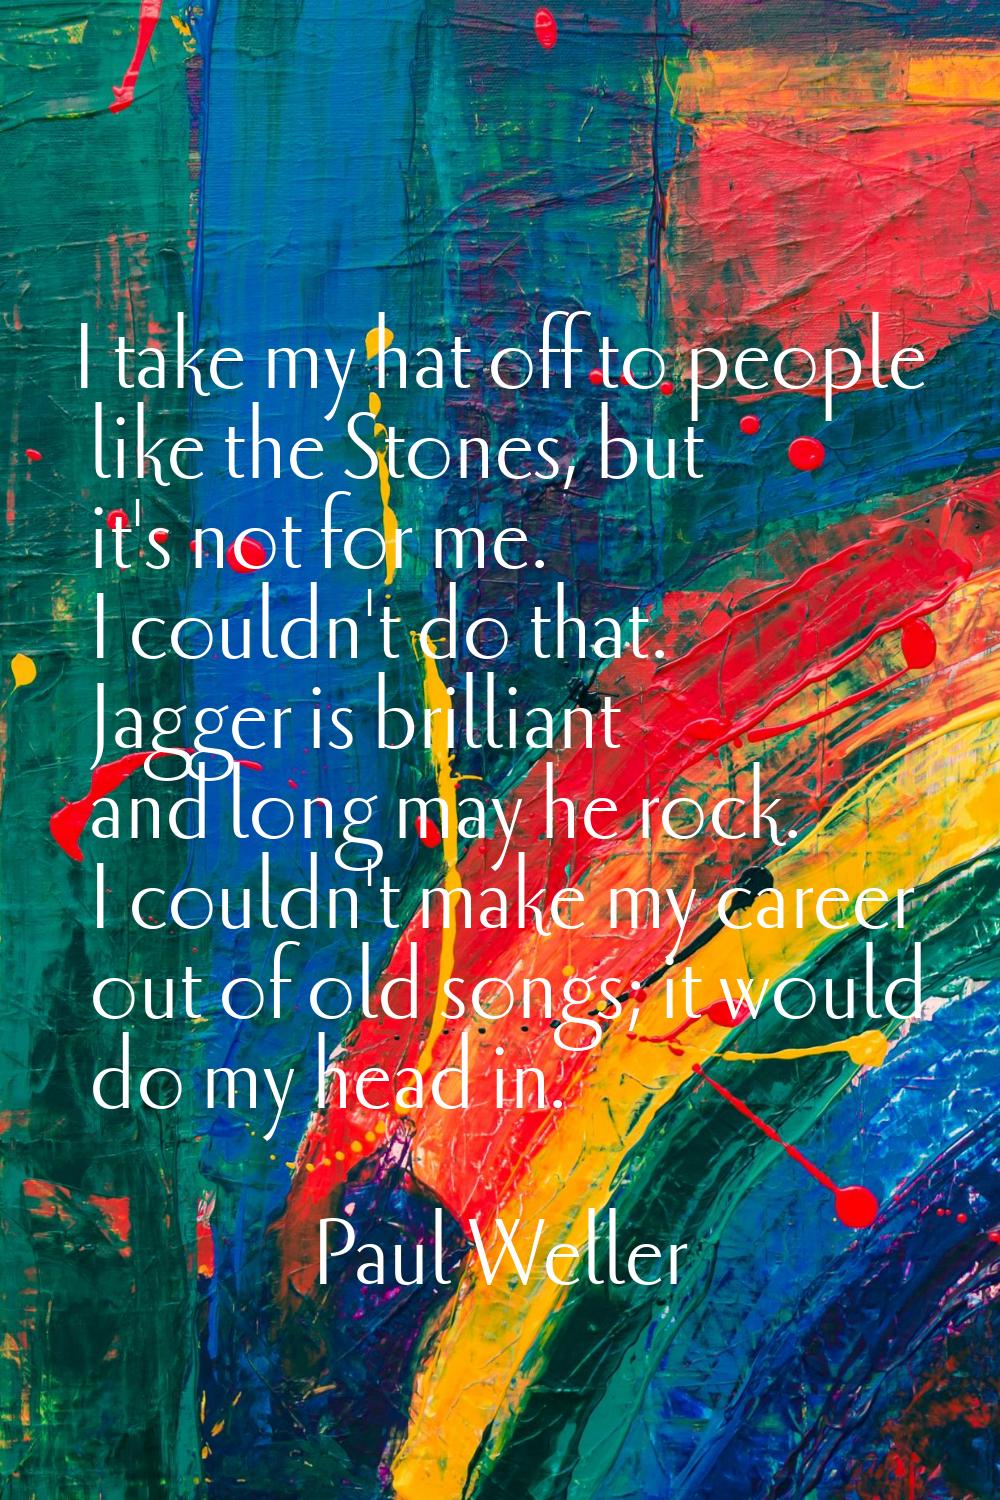 I take my hat off to people like the Stones, but it's not for me. I couldn't do that. Jagger is bri